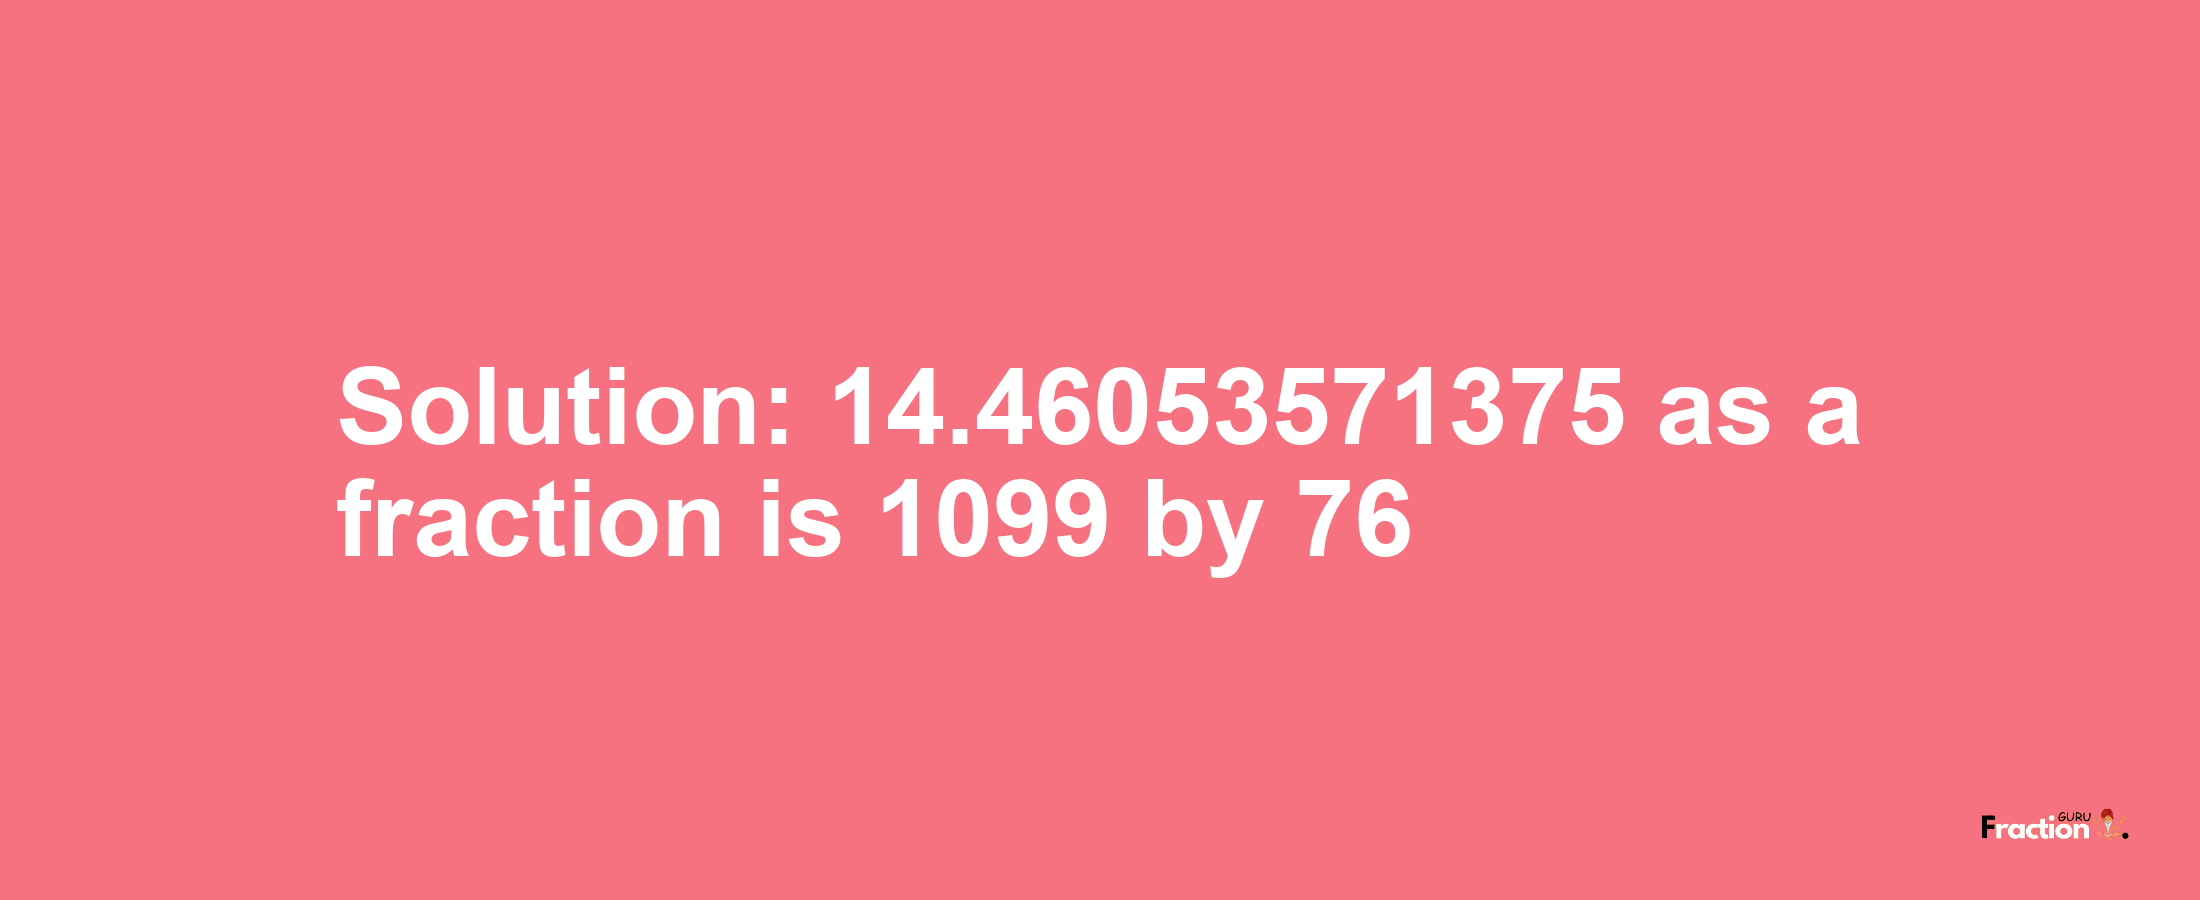 Solution:14.46053571375 as a fraction is 1099/76